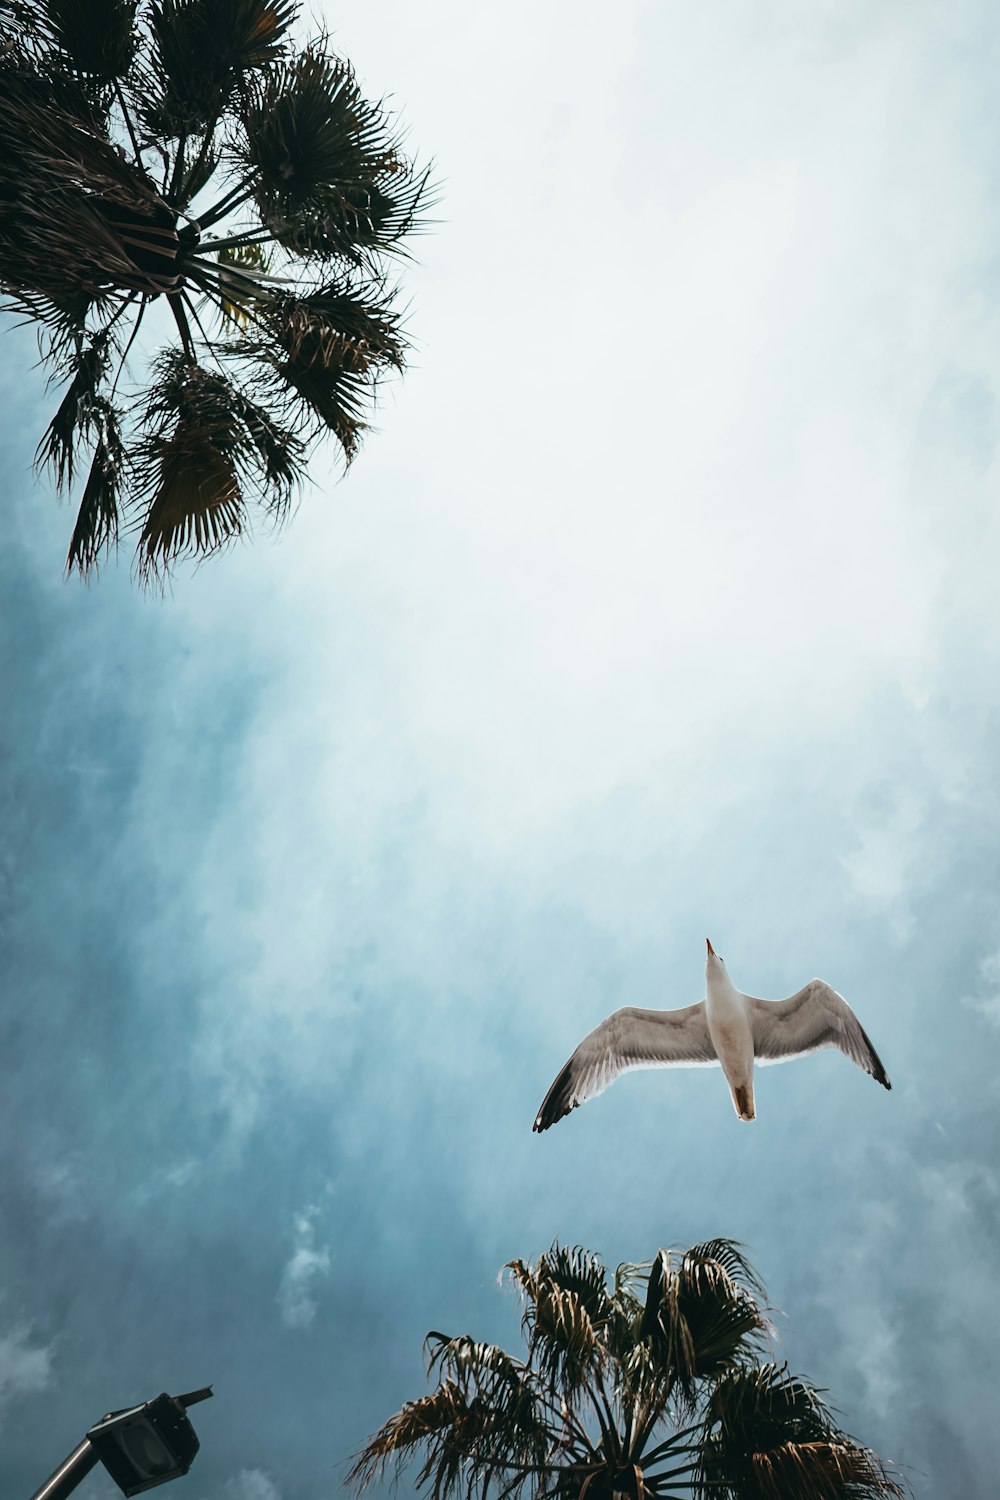 a seagull flying in the sky with palm trees in the foreground